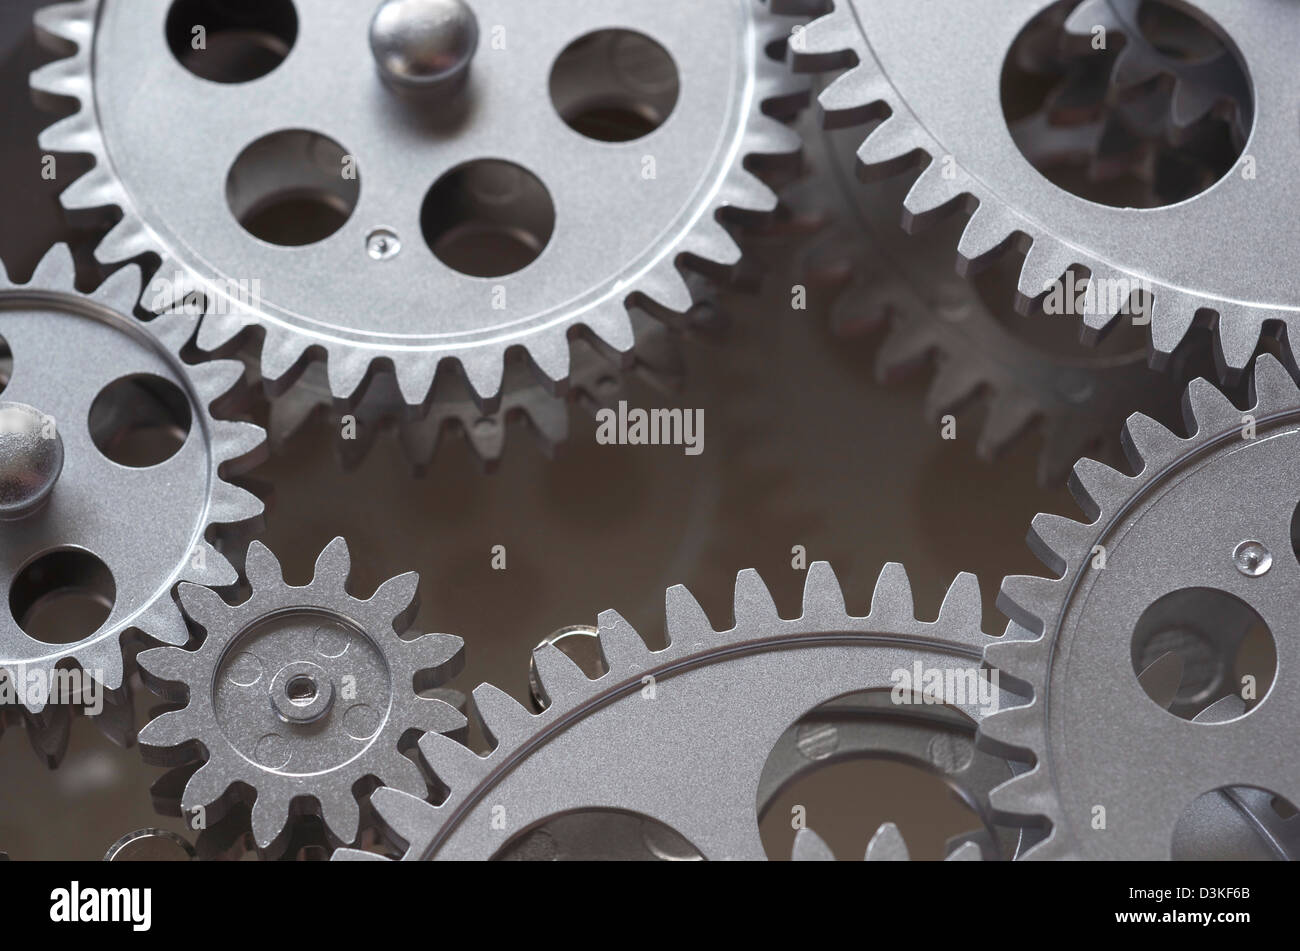 Gears interlocked that are gray, and around the perimeter of the frame with darker reflective area in the center. Stock Photo